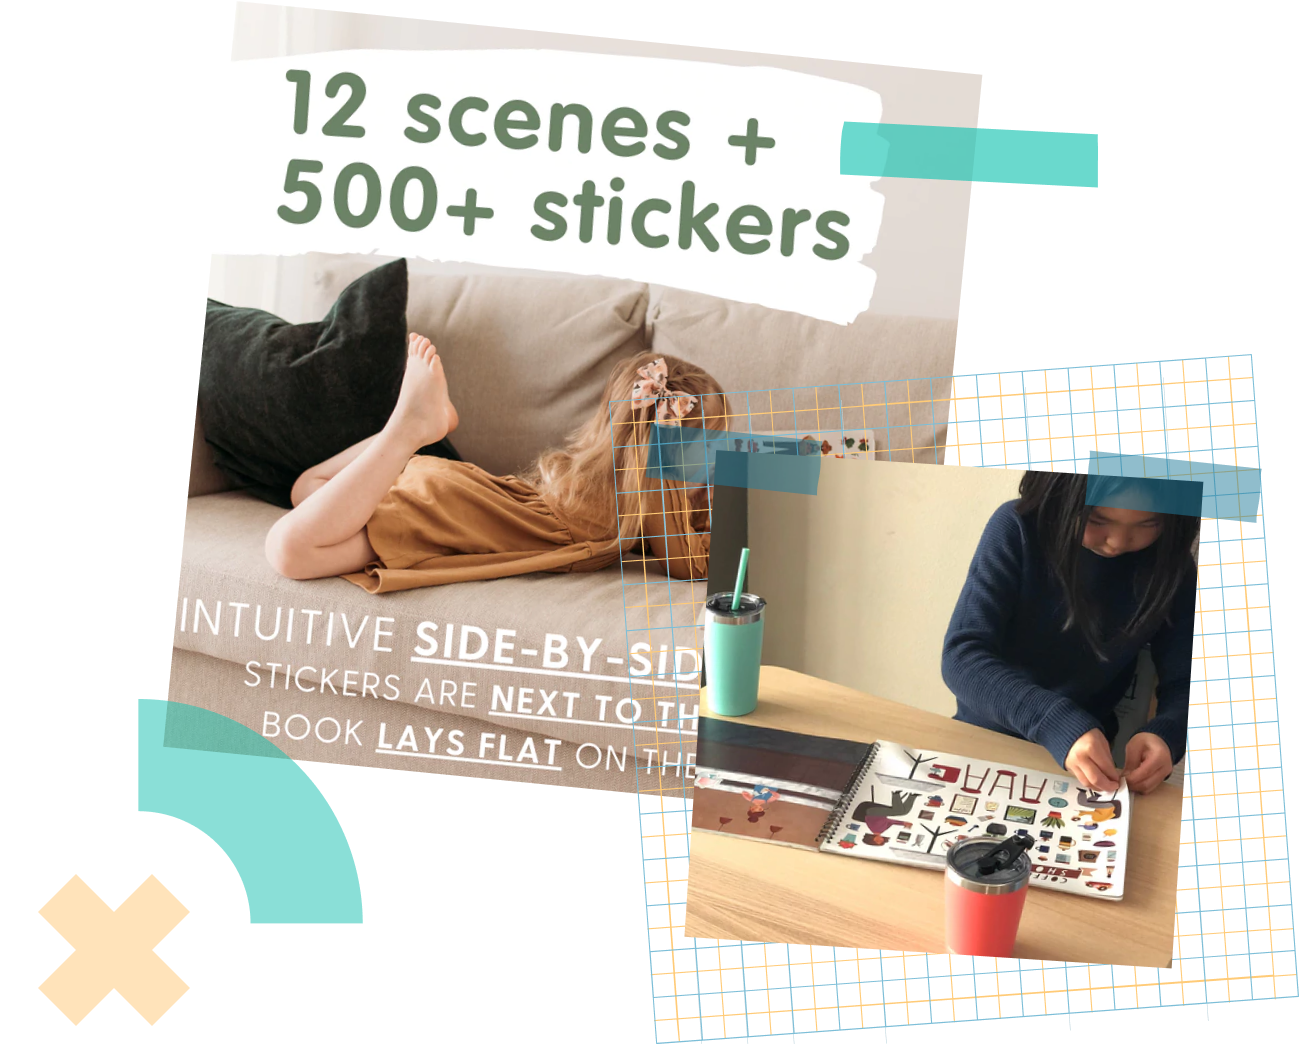 Food Truck Sticker + Coloring Book (500+ Stickers & 12 Scenes) by Cupkin -  Side by Side Sticker Adventure Time Activity Books fo